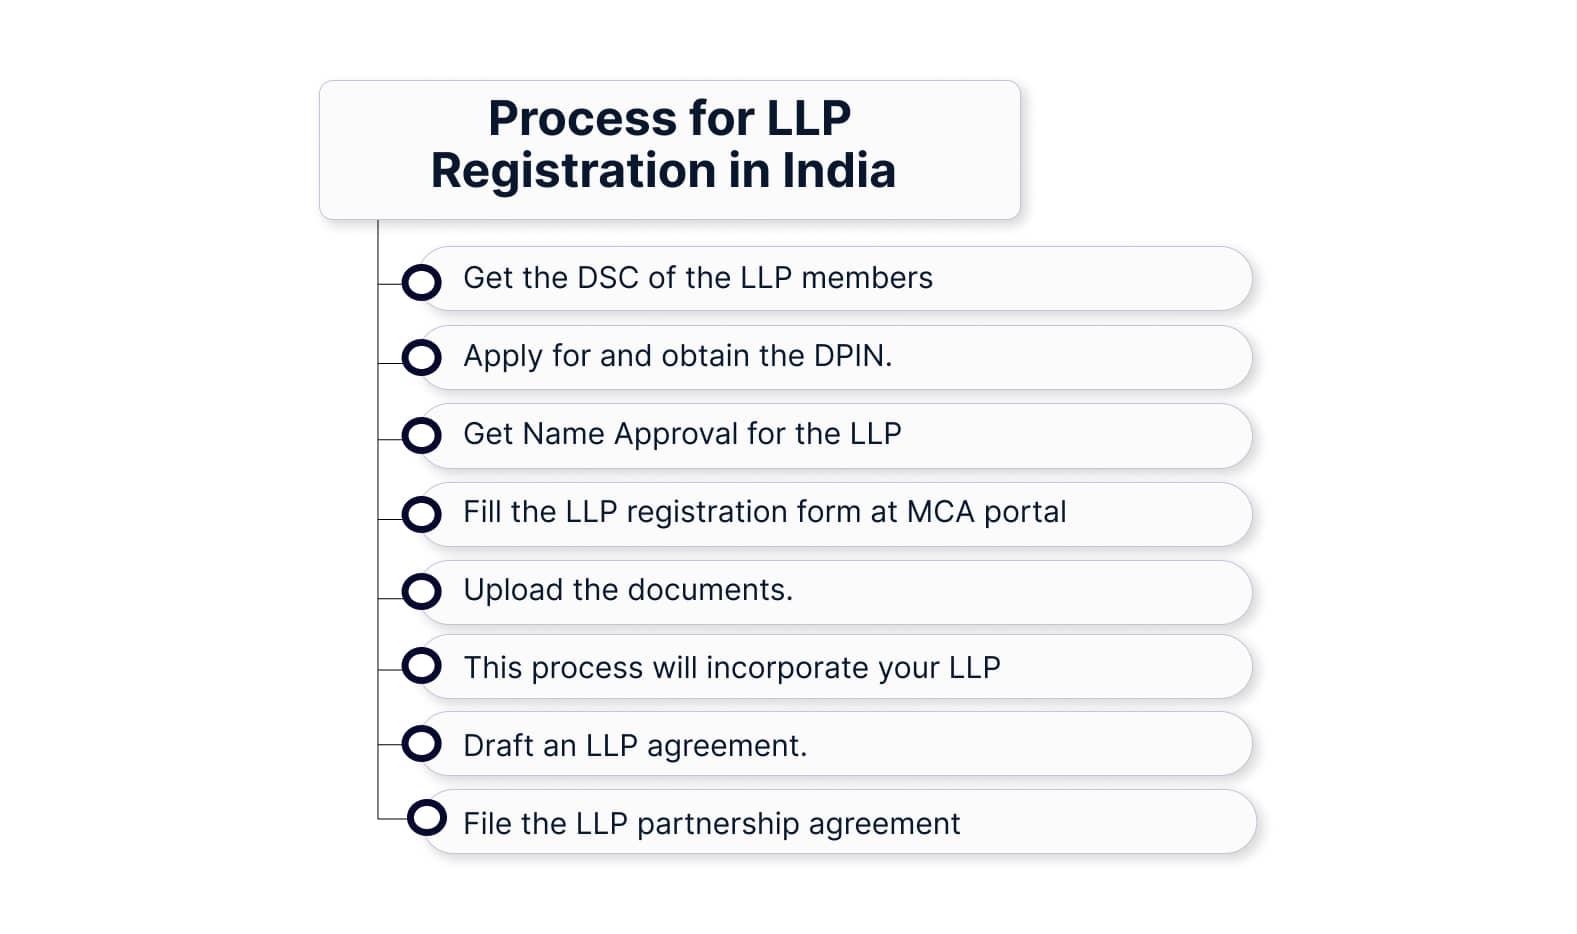 Process for LLP Registration in India